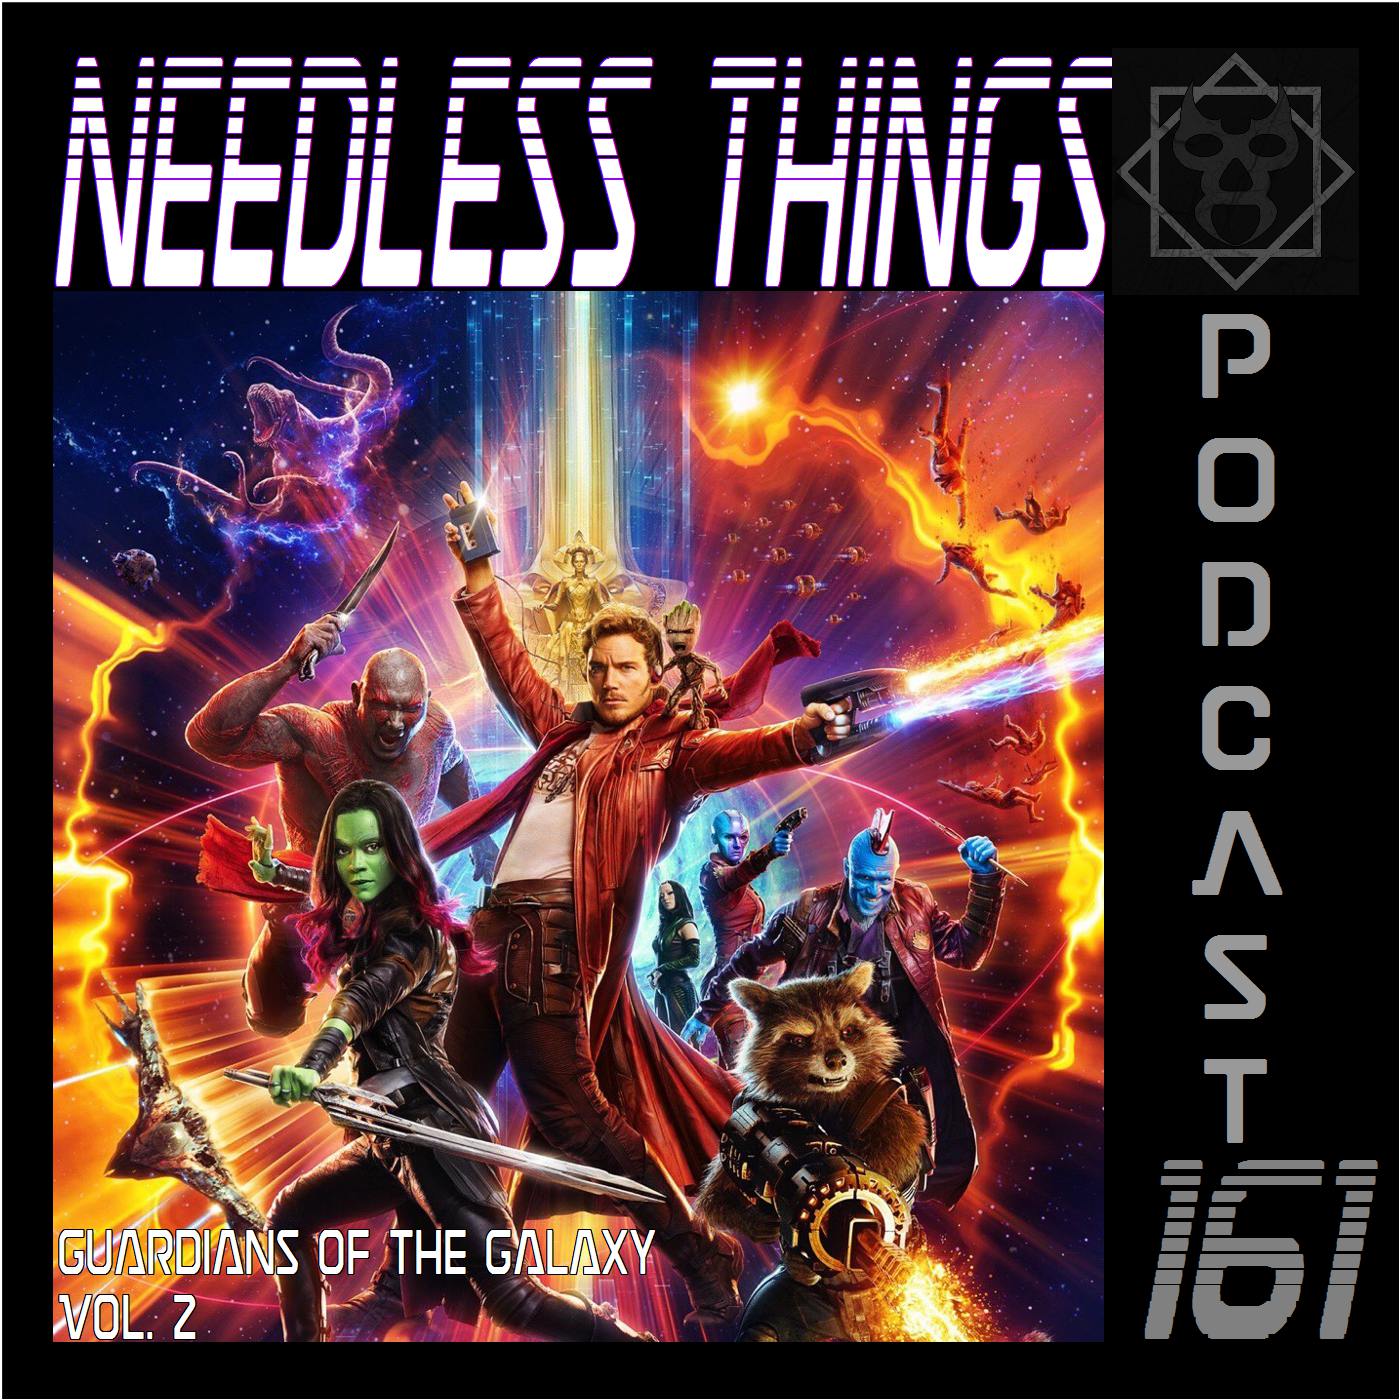 Needless Things Podcast 161 – Guardians of the Galaxy Vol. 2